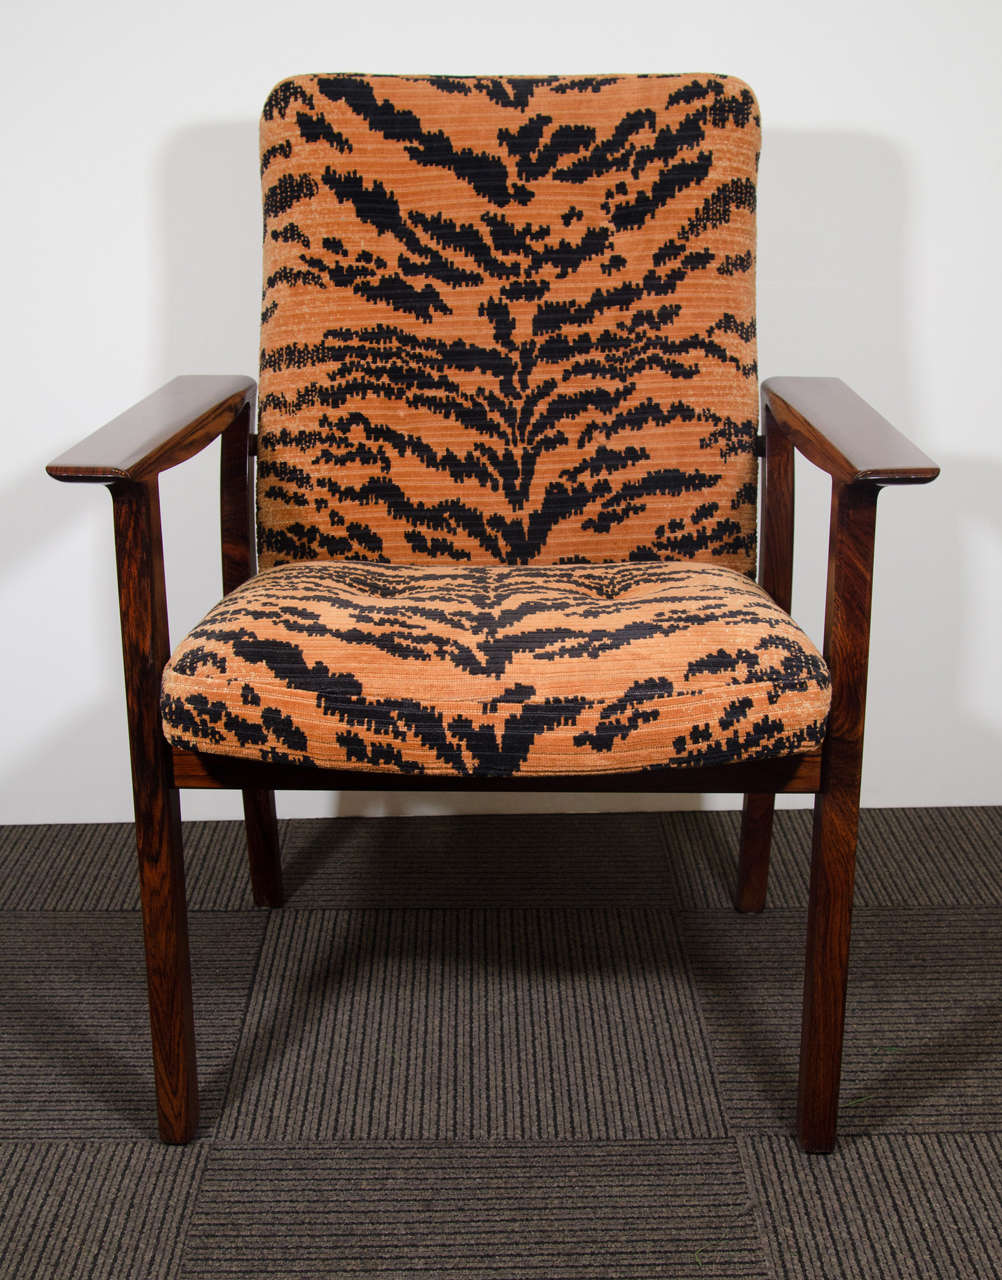 A vintage pair of rosewood armchairs or side chairs reupholstered with vintage tiger velvet upholstery, circa 1950s.